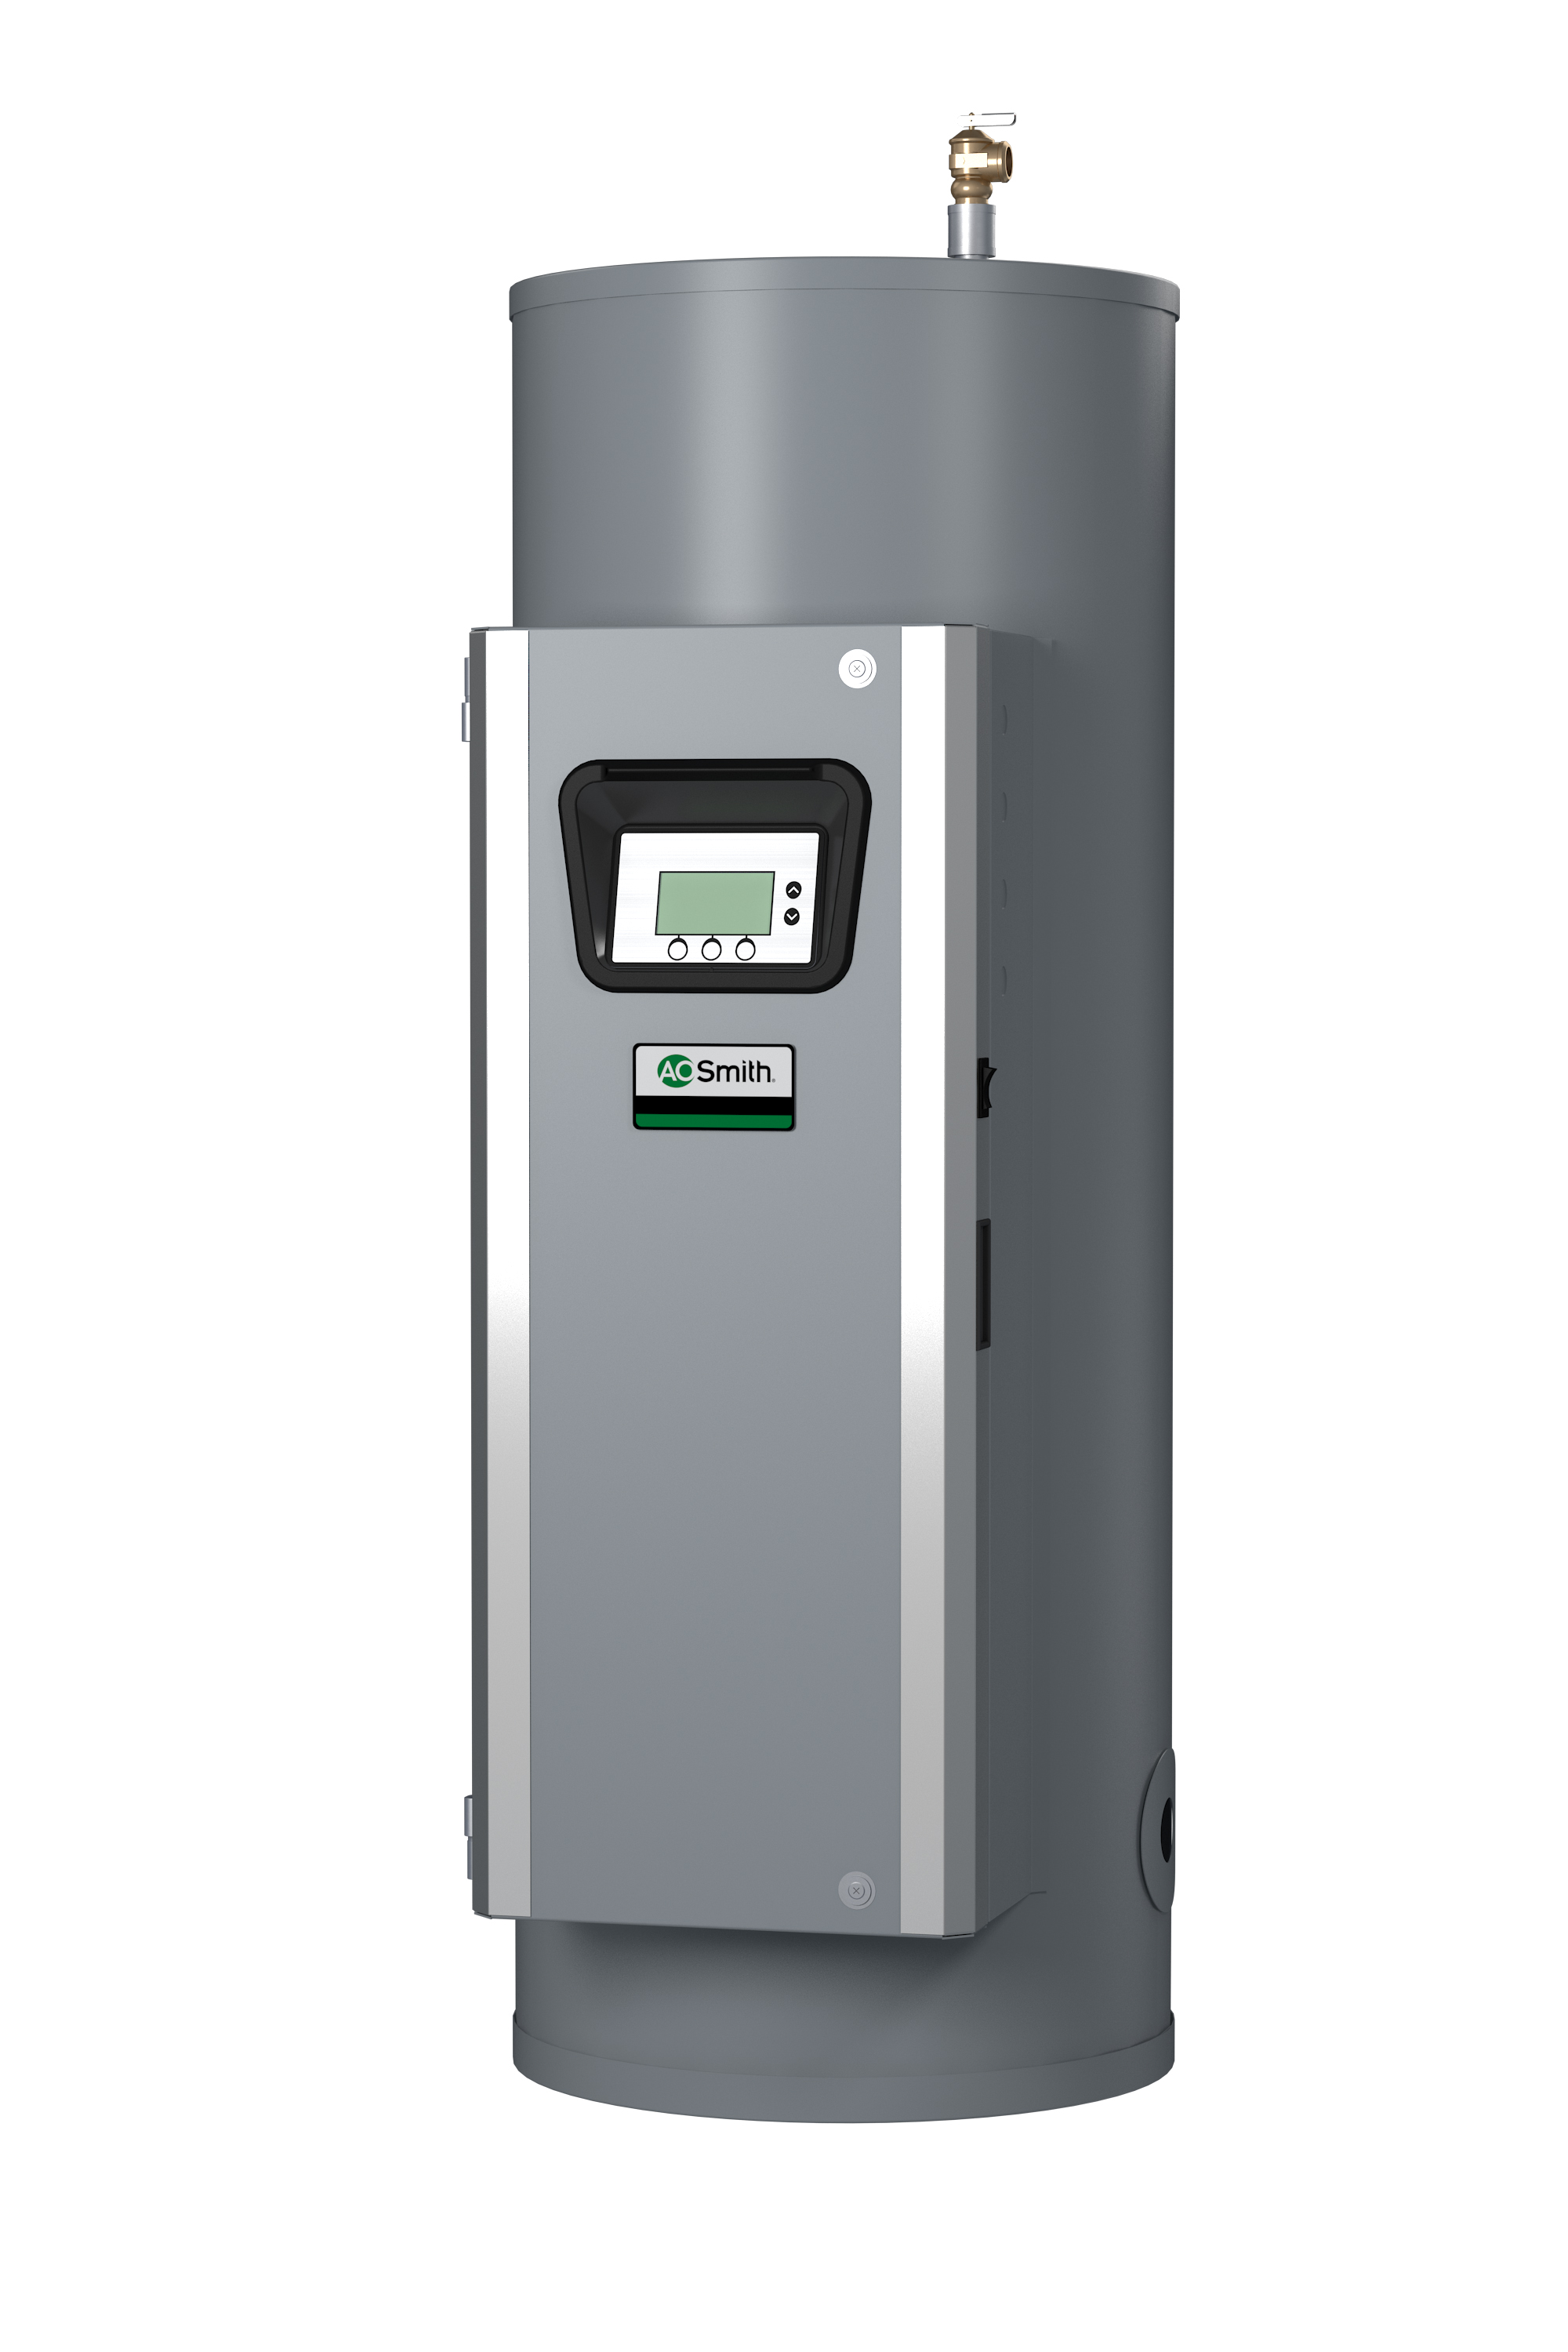 AO SMITH DSE-100A-24, 100 GALLONS, 24KW, 480 VOLT, 50 AMPS, 1 PHASE, 2 ELEMENTS, ASME CUSTOM Xi SERIES HEAVY DUTY COMMERCIAL ELECTRIC WATER HEATER